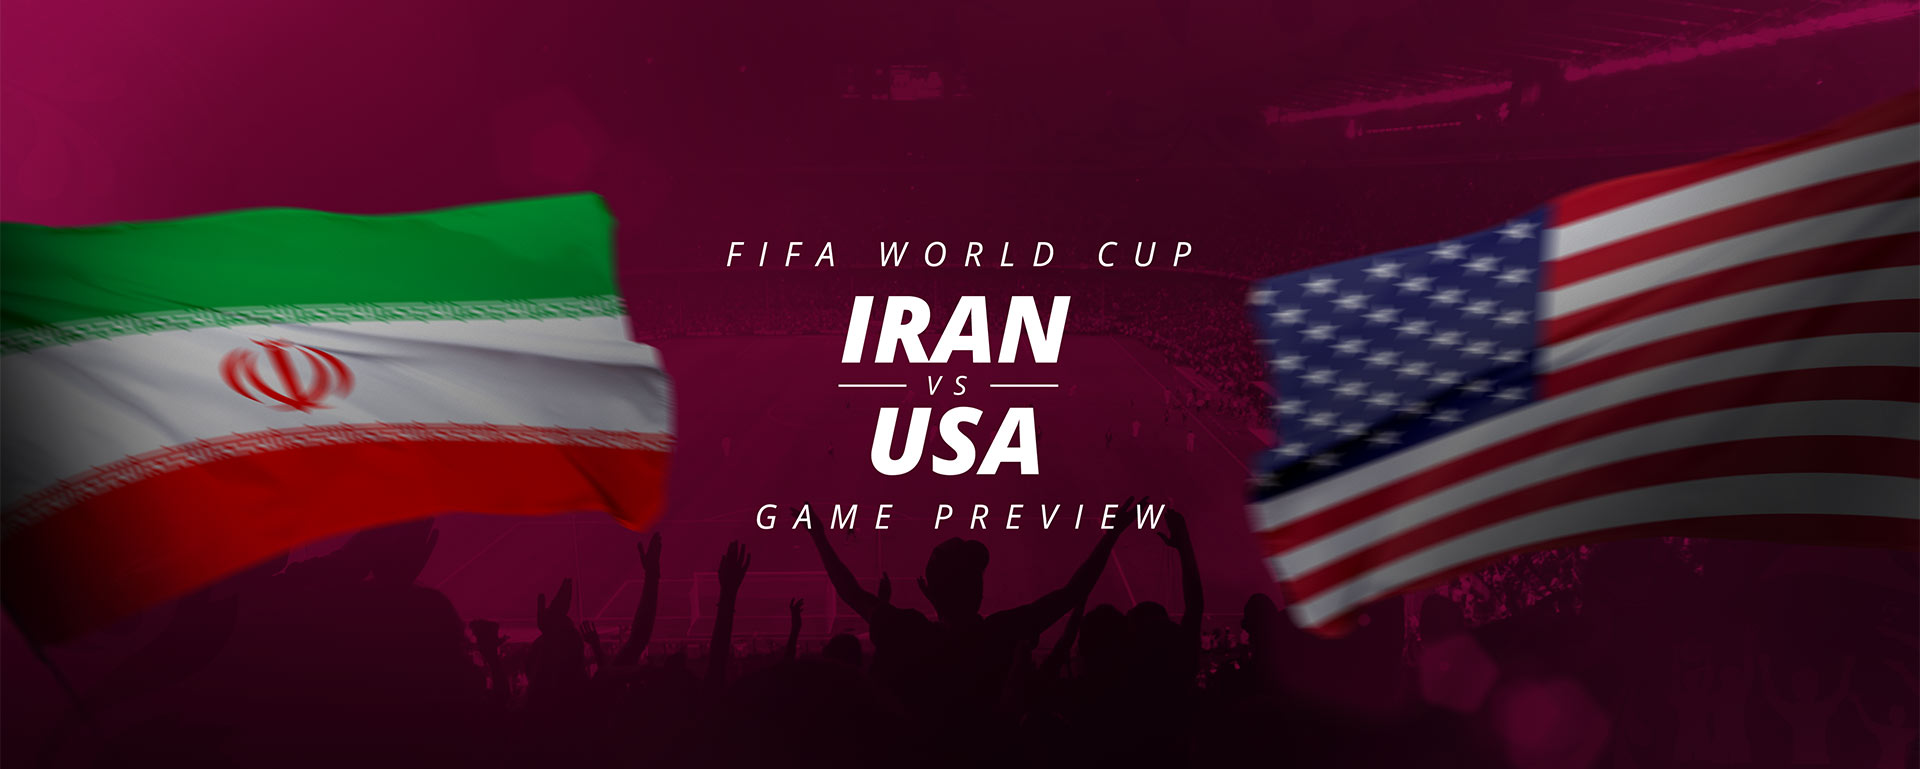 FIFA WORLD CUP: IRAN V USA – GAME PREVIEW